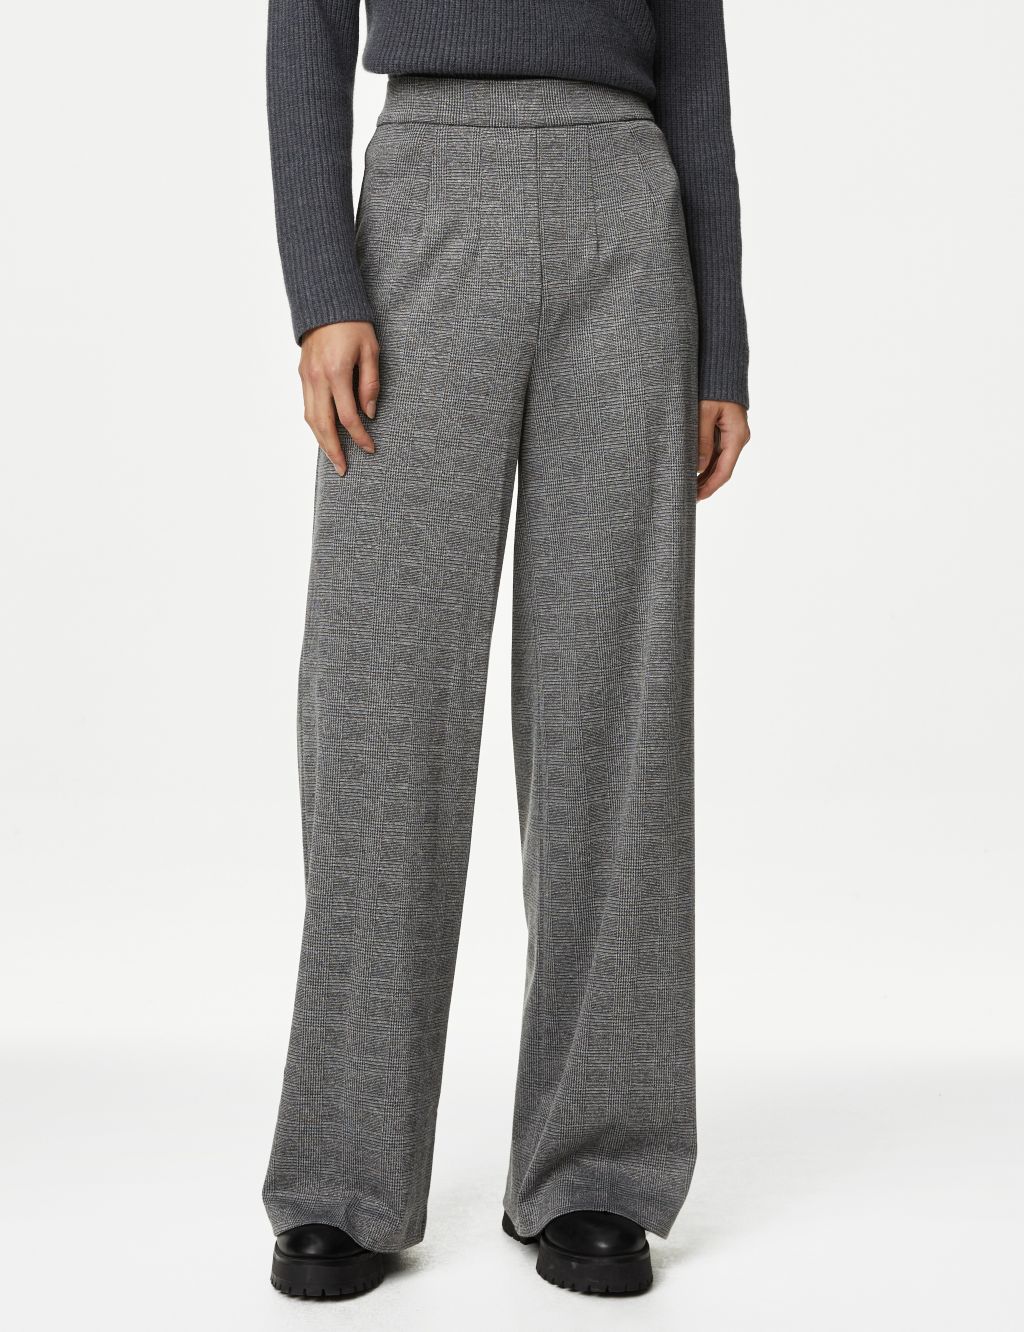 Jersey Checked Wide Leg Trousers image 2